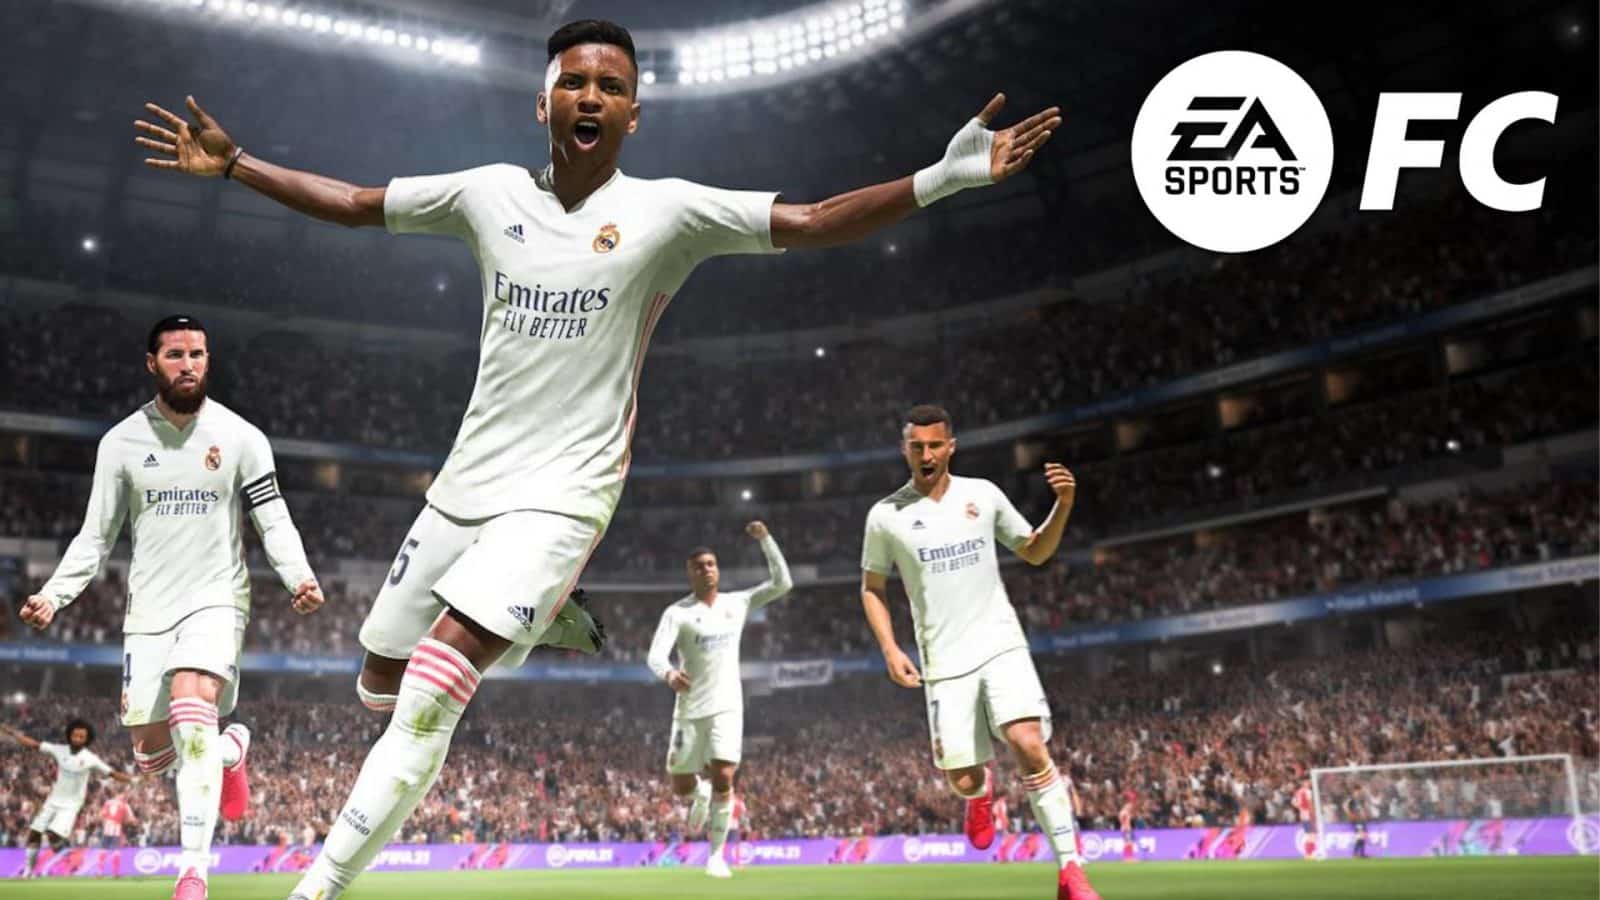 What is EA Sports FC & what will the new FIFA game be called?